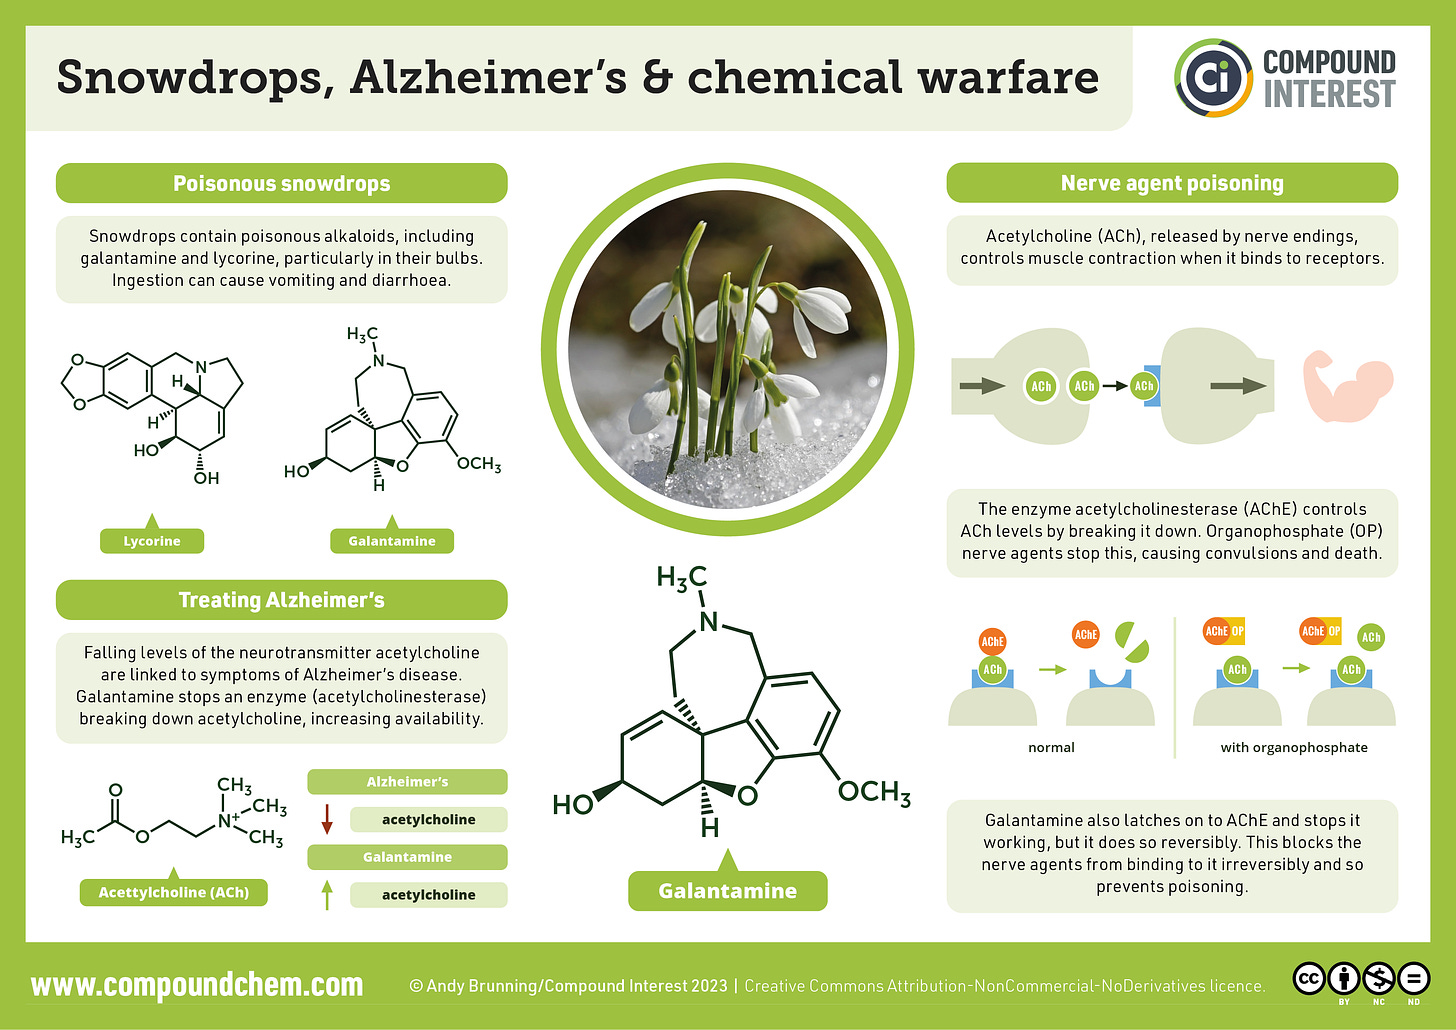 Infographic on snowdrops, Alzheimer's and chemical warfare. Snowdrops contain poisonous alkaloids which, if they are eaten, can cause vomiting and diarrhoea. Falling levels of the neurotransmitter acetylcholine are associated with Alzheimer's disease. Galantamine stops an enzyme that breaks acetylcholine down. Organophosphate nerve agents target an enzyme that breaks down acetylcholine; galantamine can bind reversible to this enzyme, blocking the nerve agents. 